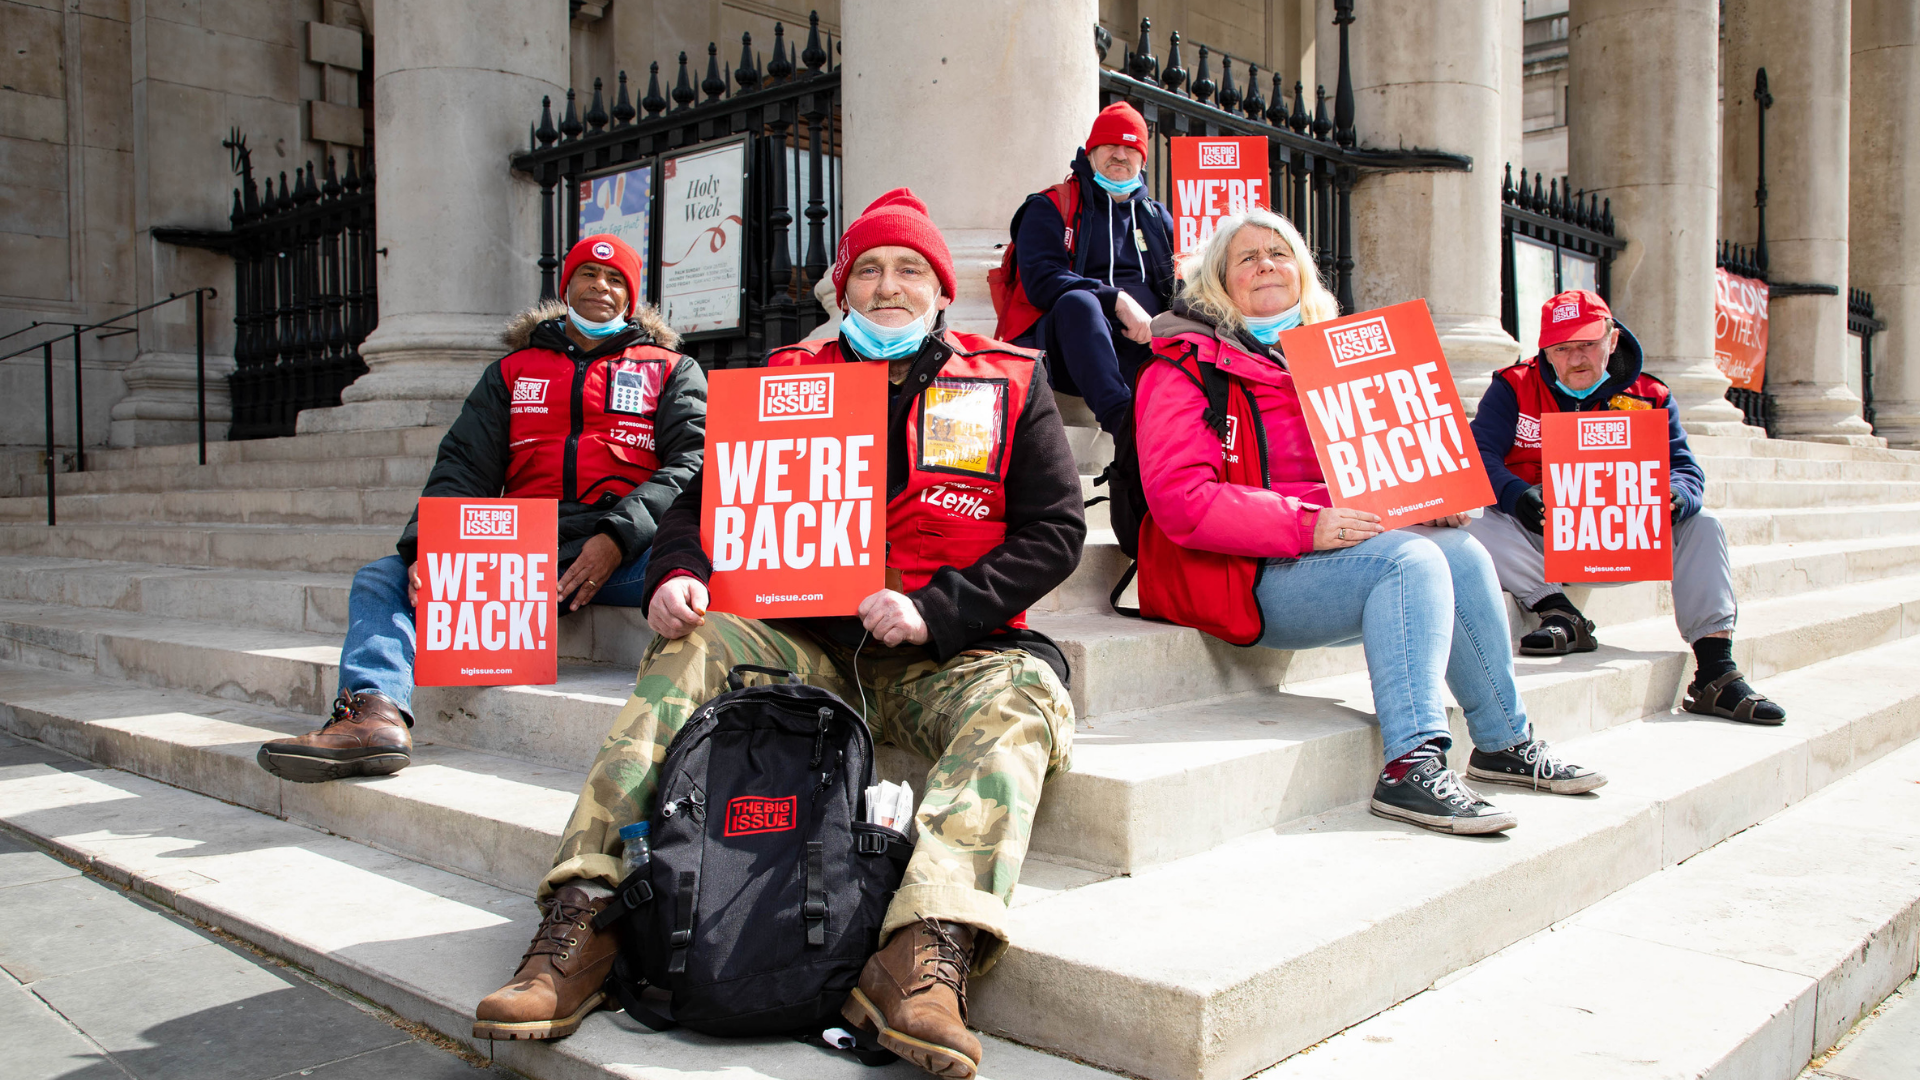 Vendors of The Big Issue mark the return of the magazine being sold, by meeting at St Martins in the Fields on Trafalgar Square, where the first-ever edition of the magazine was officially launched nearly 30 years ago. Image credit: David Parry/PA Wire